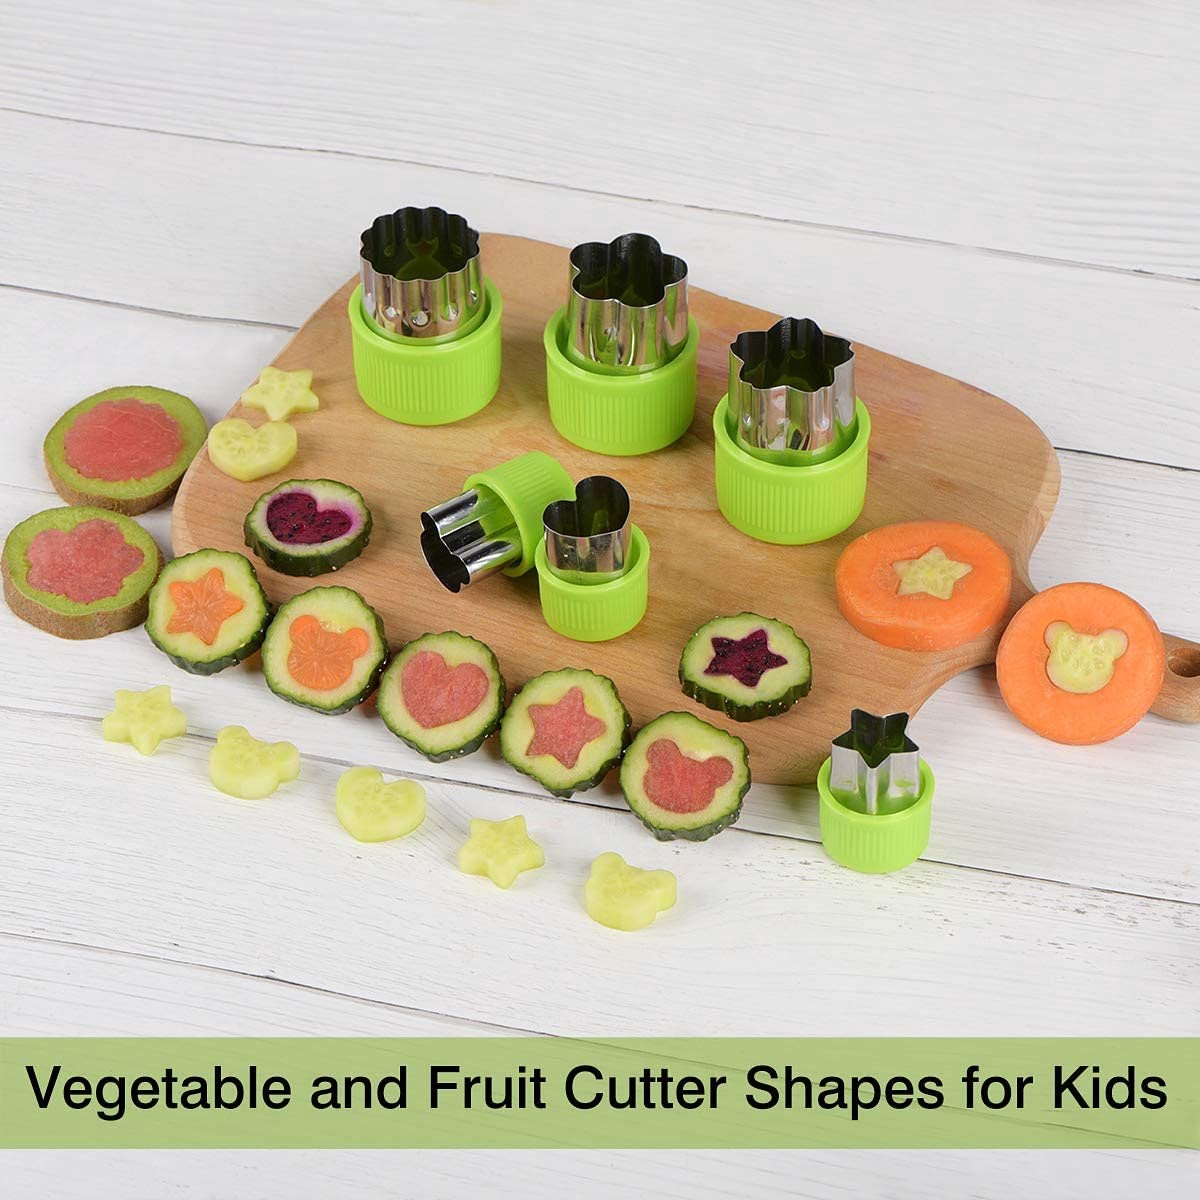 Food Cutter Shapes